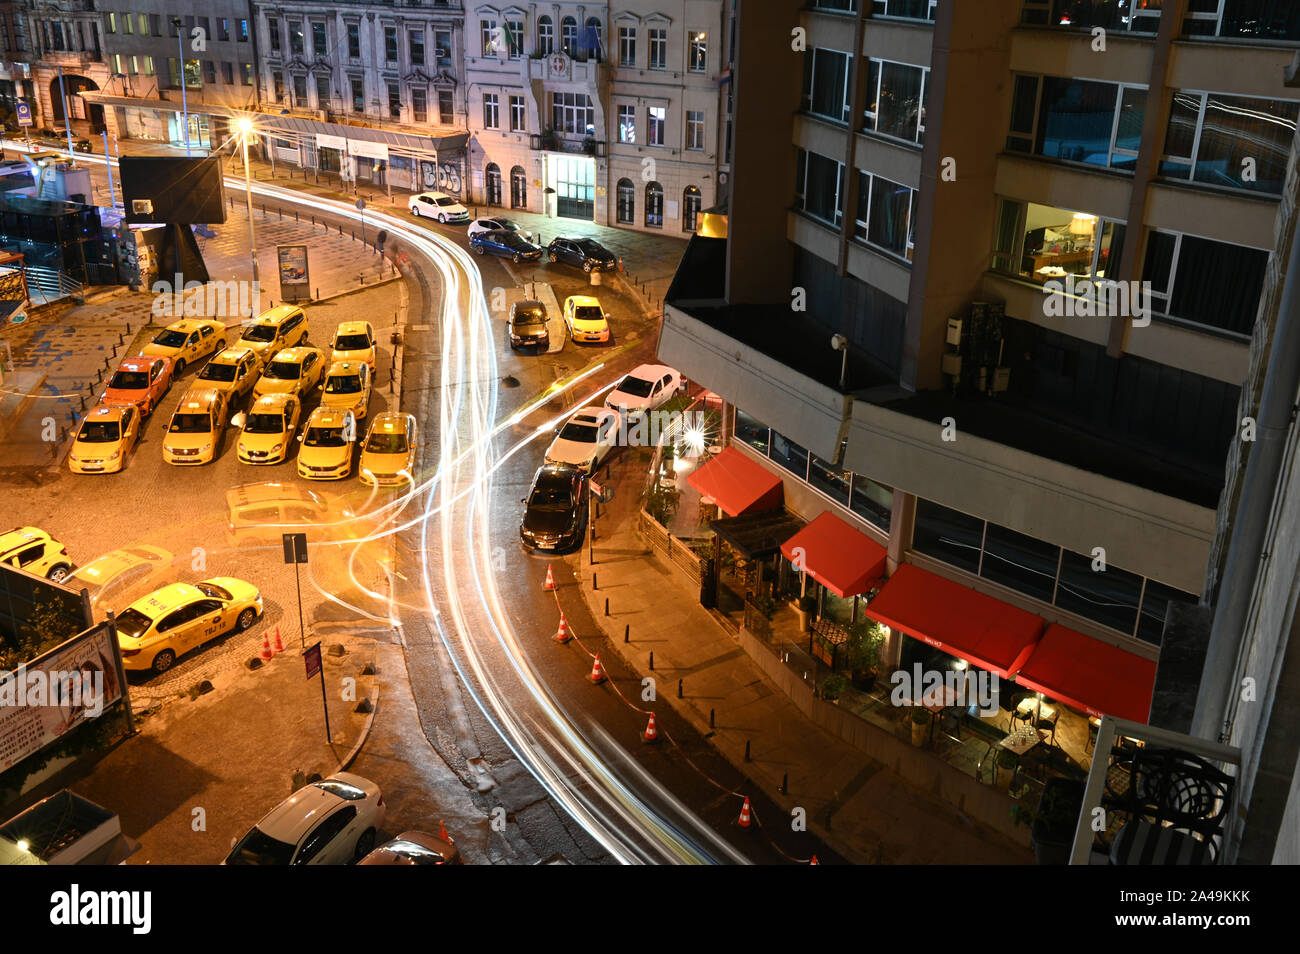 Istanbul, Turkey - October 7, 2019: Taxis wait for fares in a lot next to a winding road in a long-exposure nighttime shot. Stock Photo